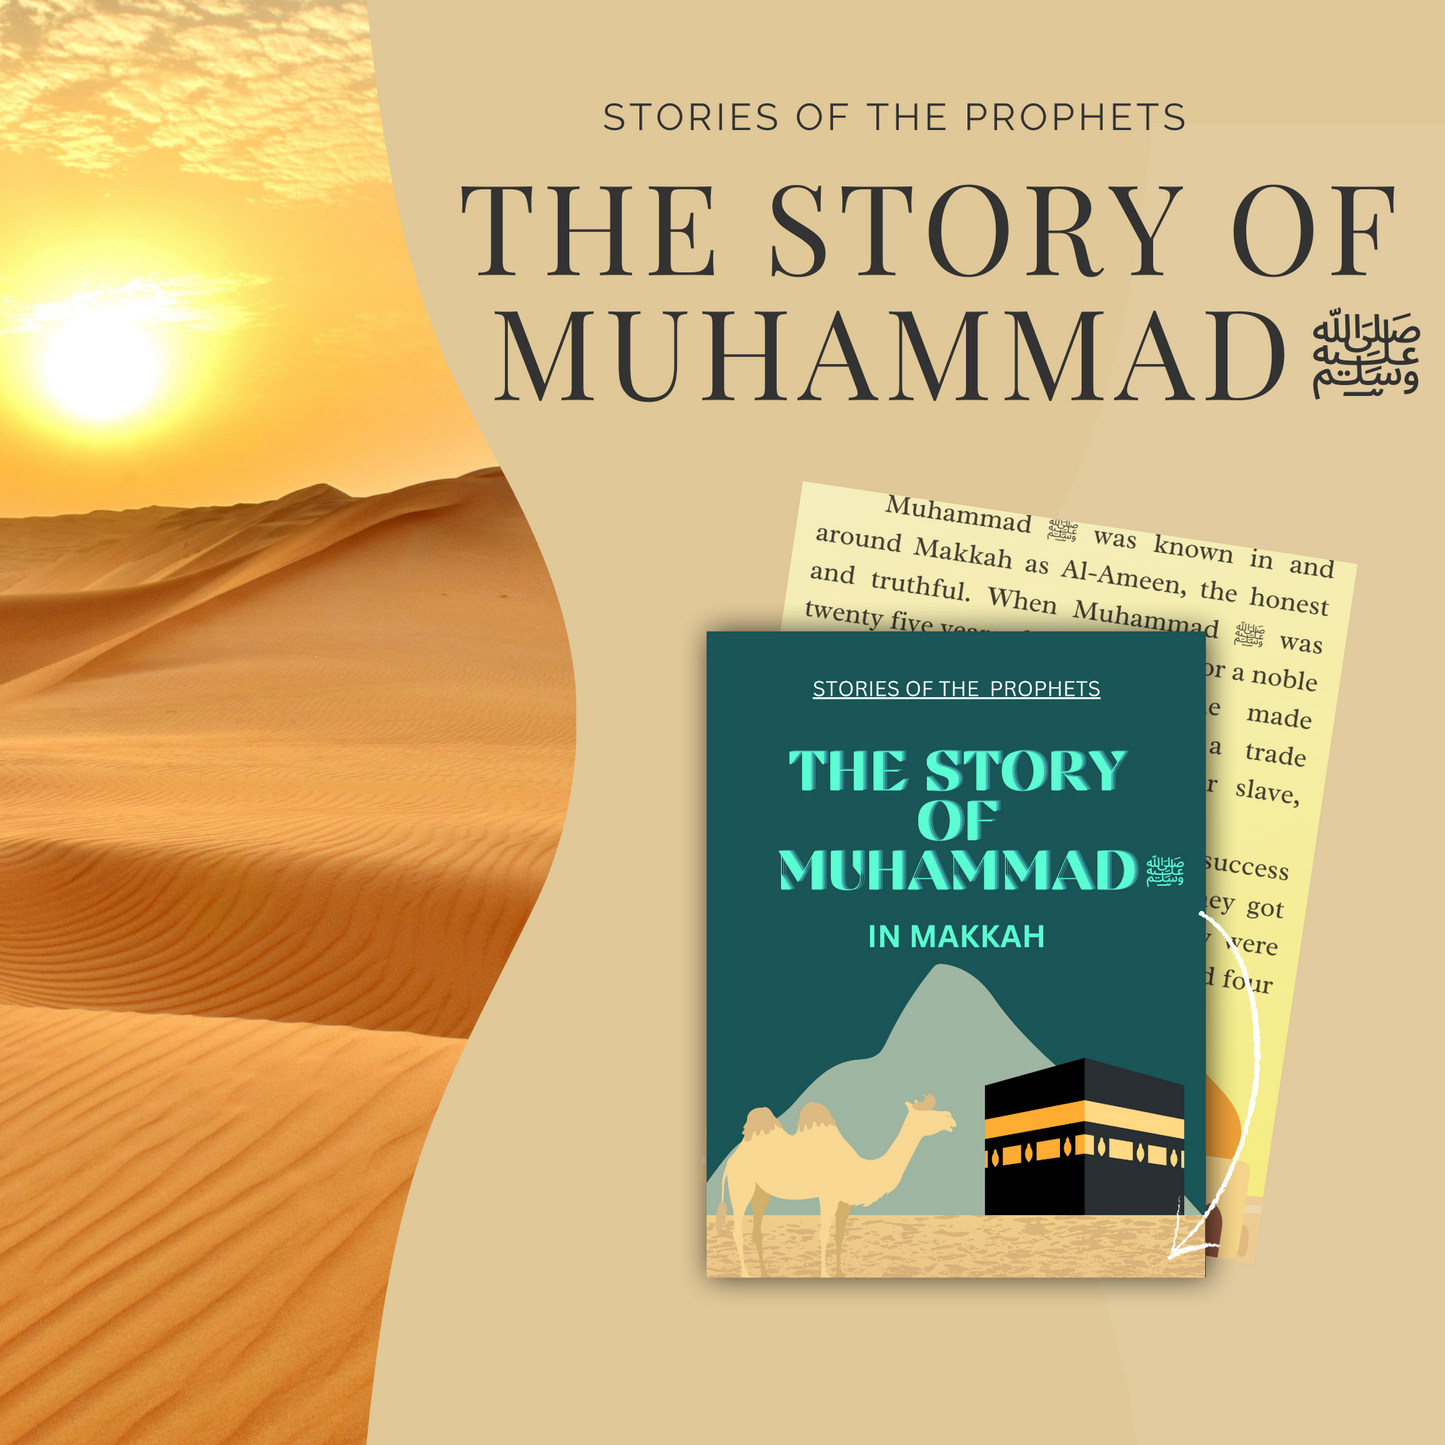 Muhammad (PBUH) in Makkah: A Journey of Faith and Perseverance